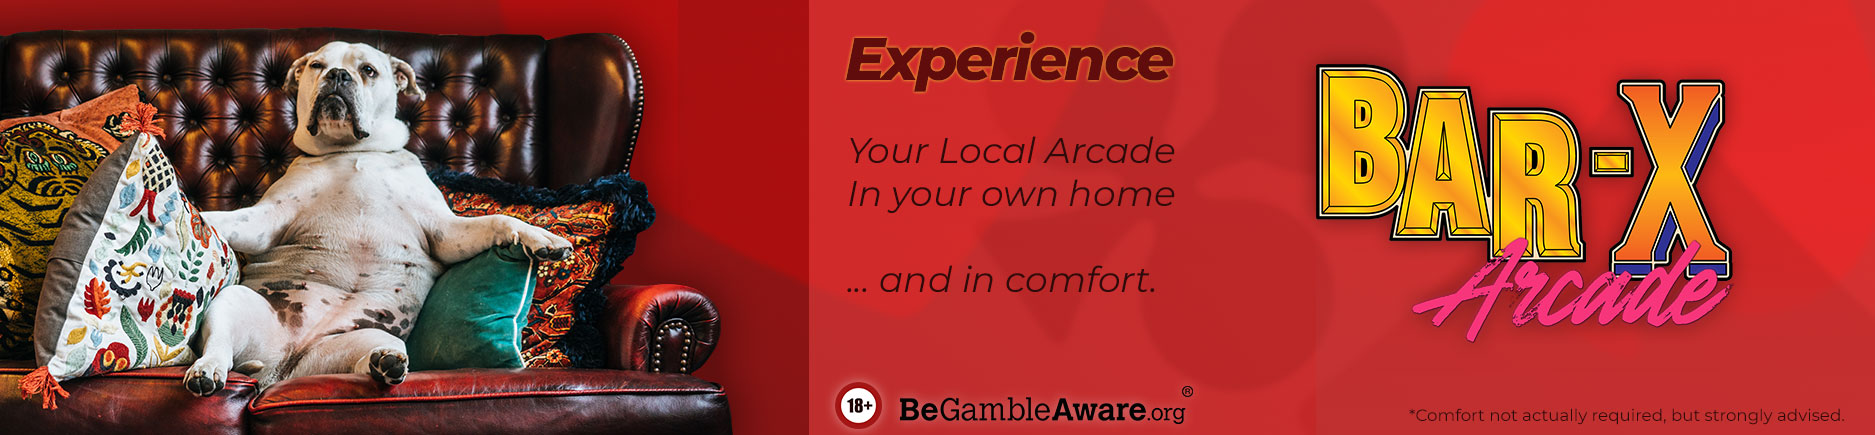 Experience your Local Arcade in your own home...and in comfort!